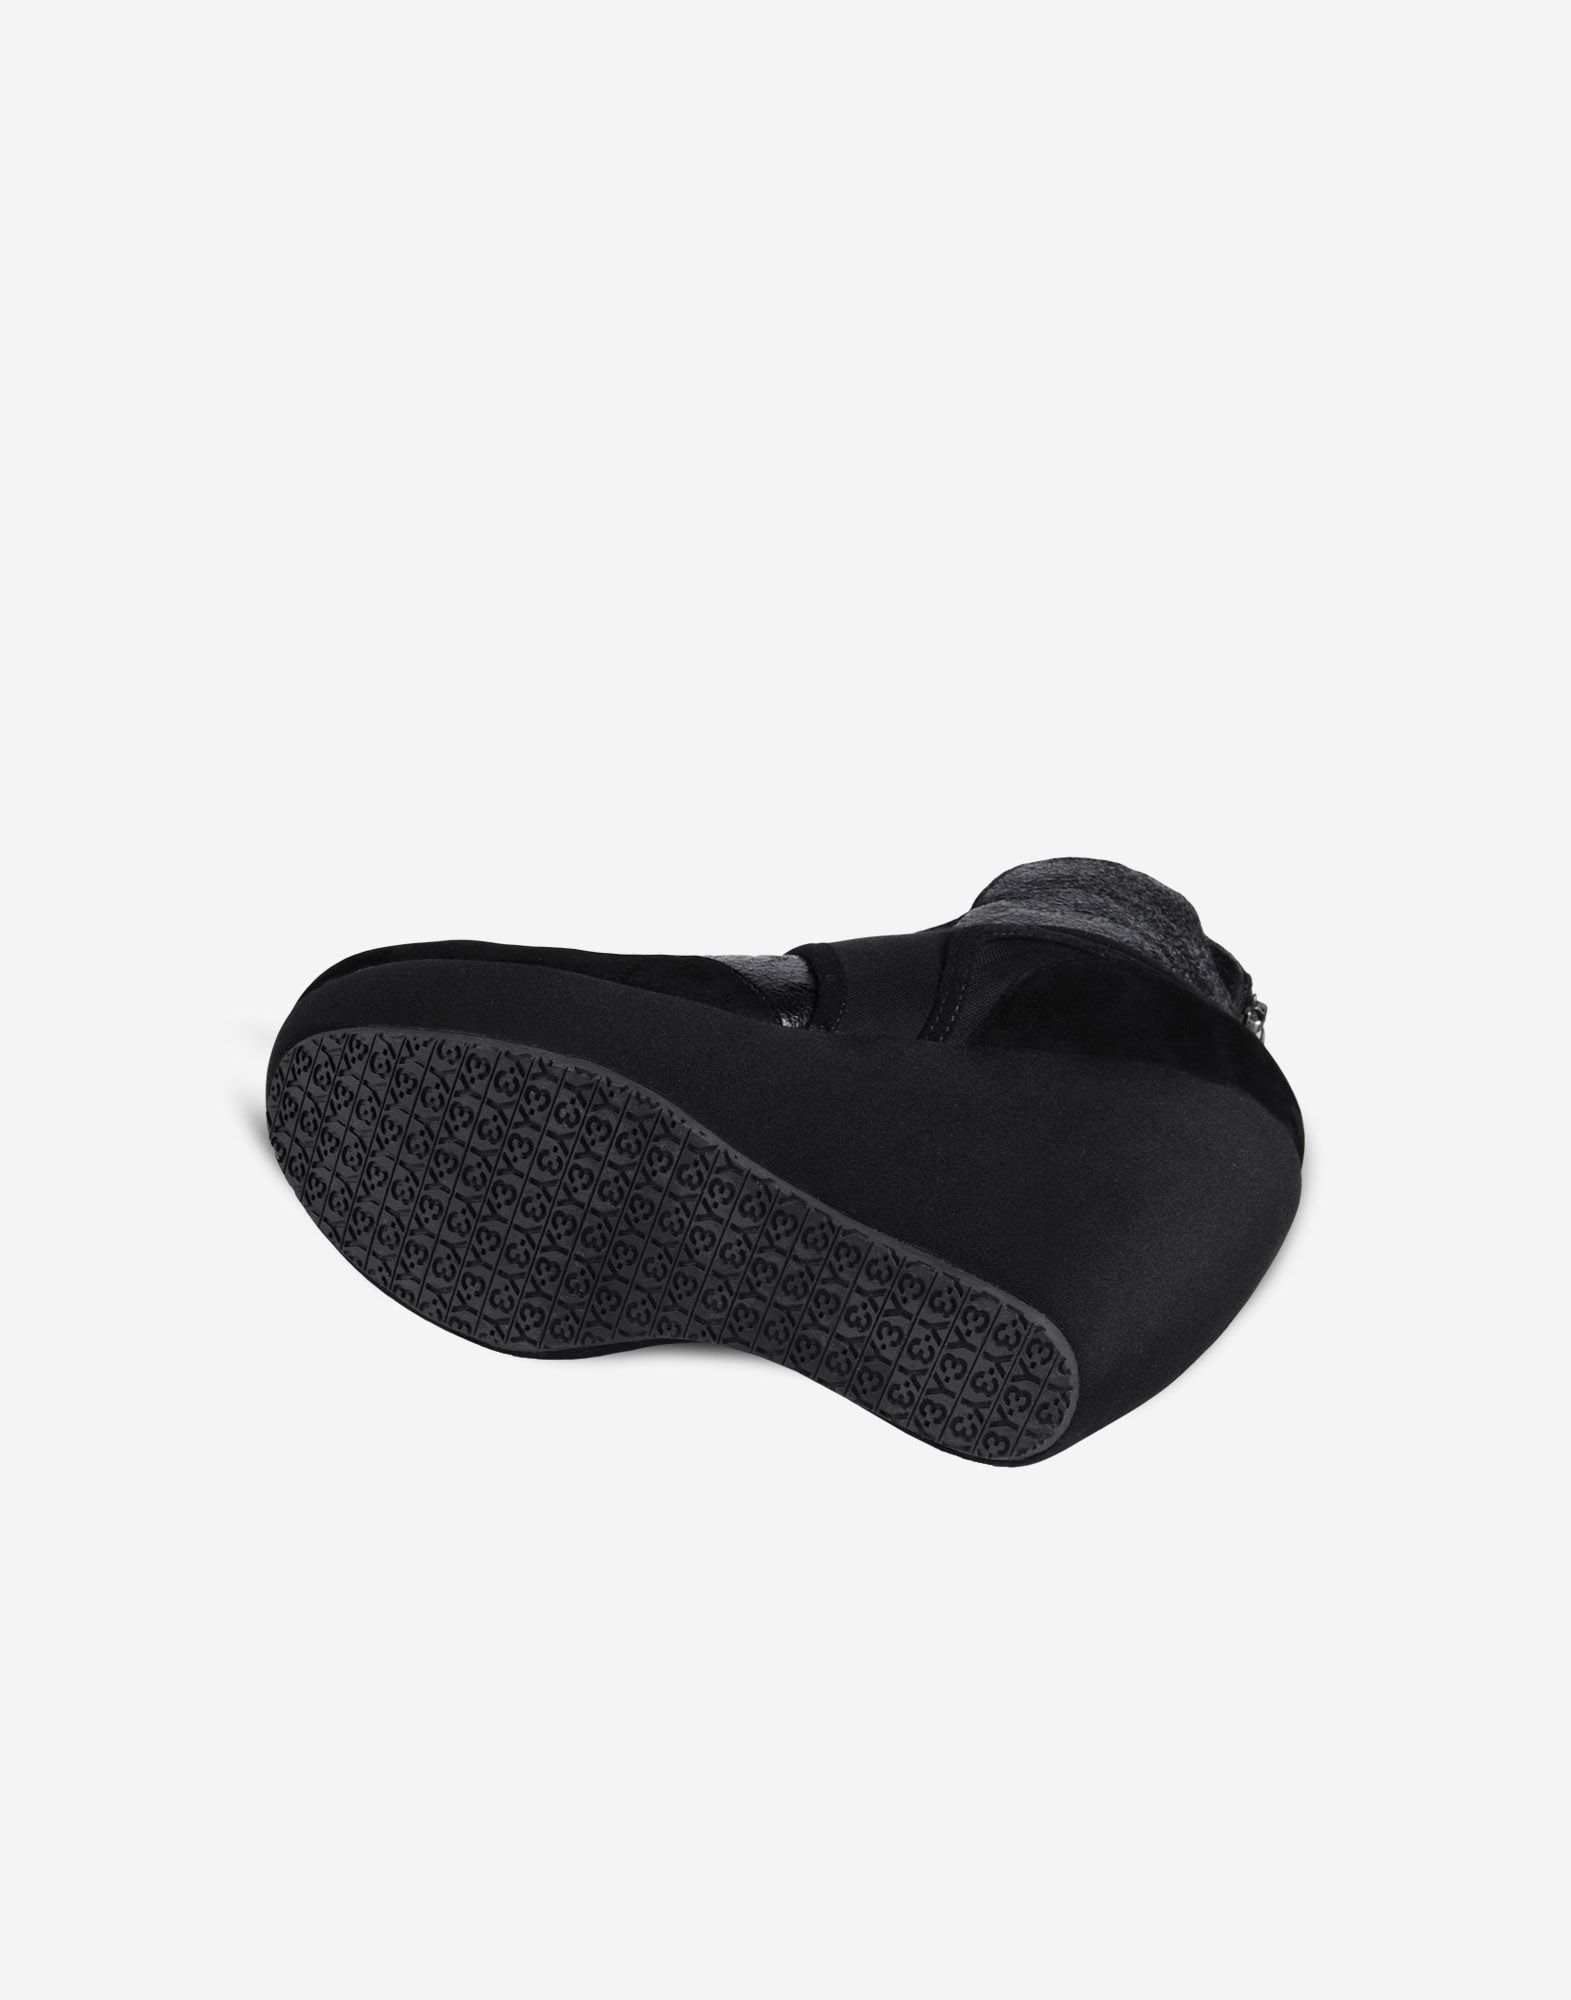 Y 3 SHELL WEDGE for Women | Adidas Y-3 Official Store